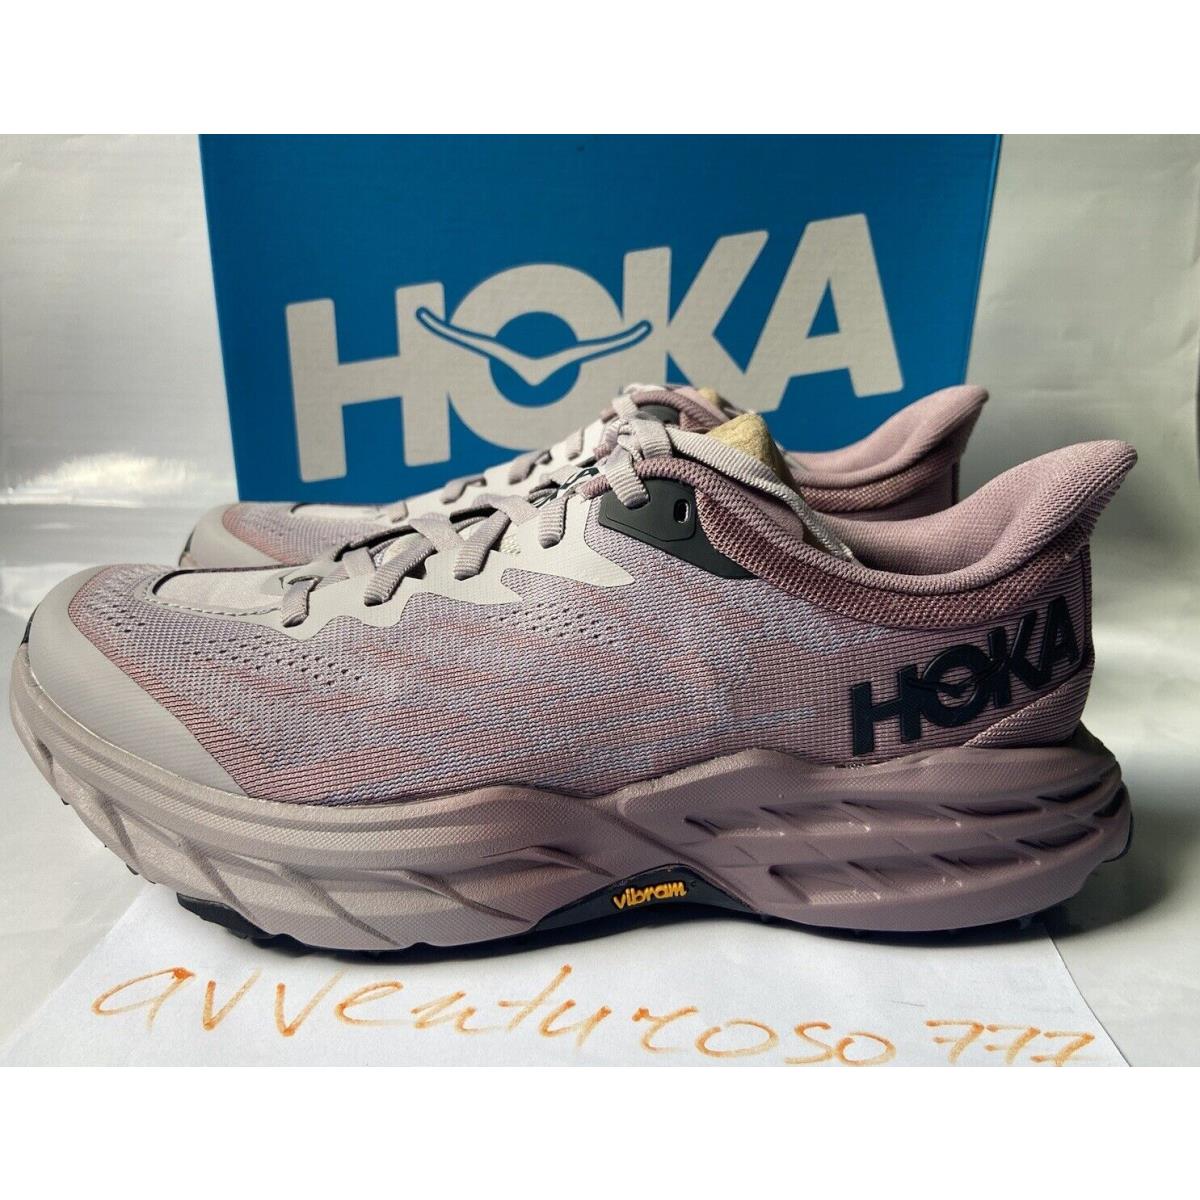 Hoka One One Speedgoat 5 Women`s Size 8.5 Running Shoes Lilac Marble 1123158